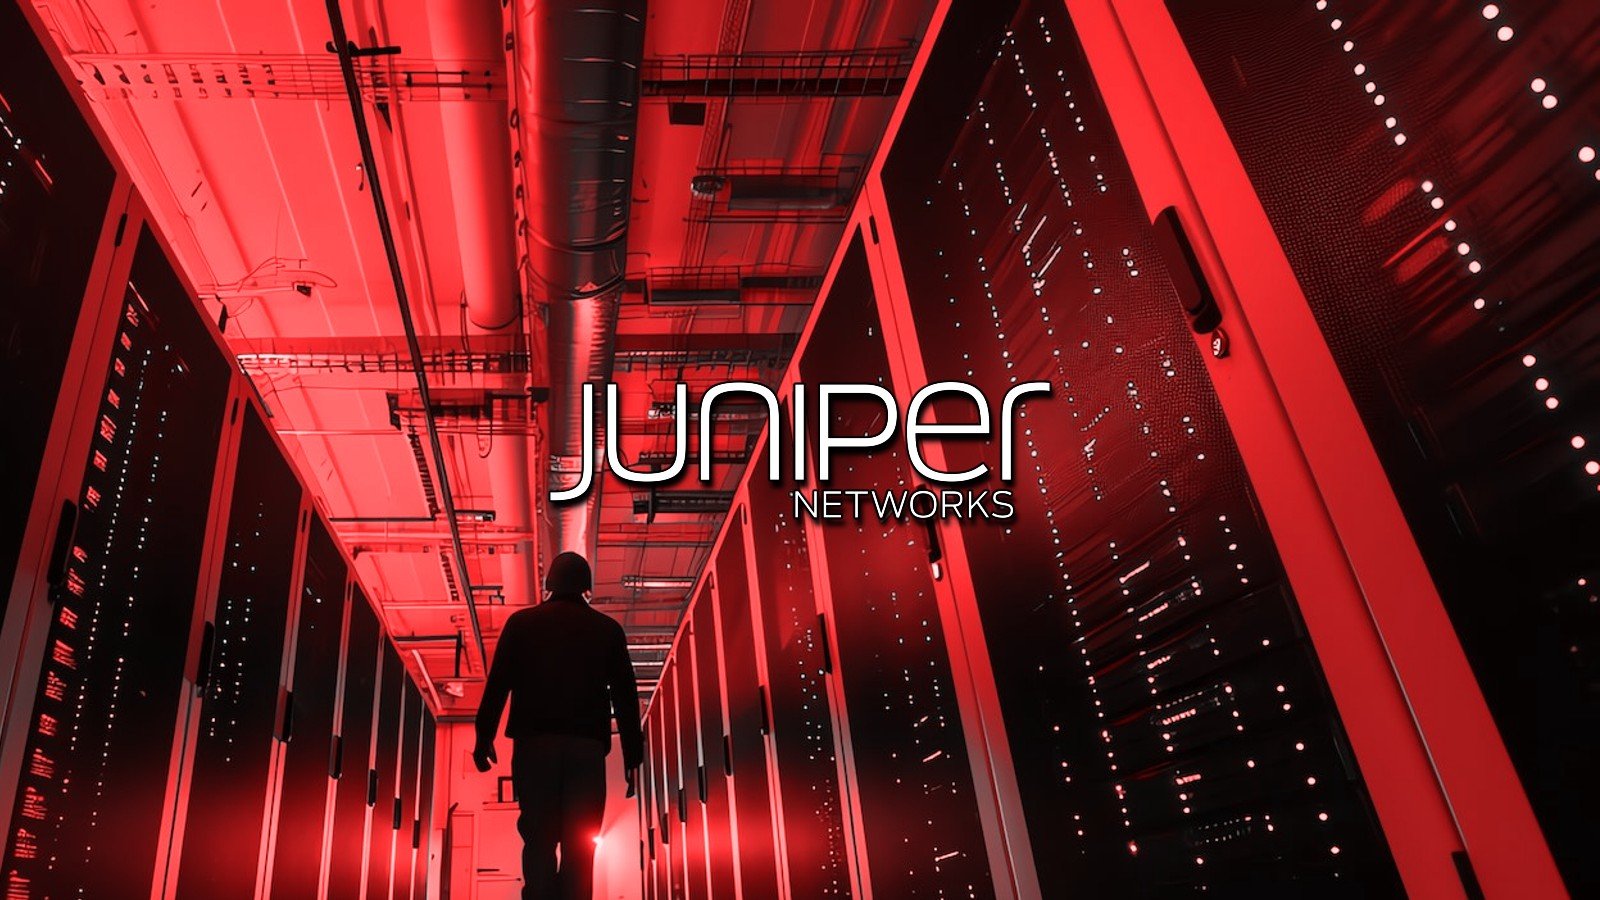 Juniper warns of critical RCE bug in its firewalls and switches